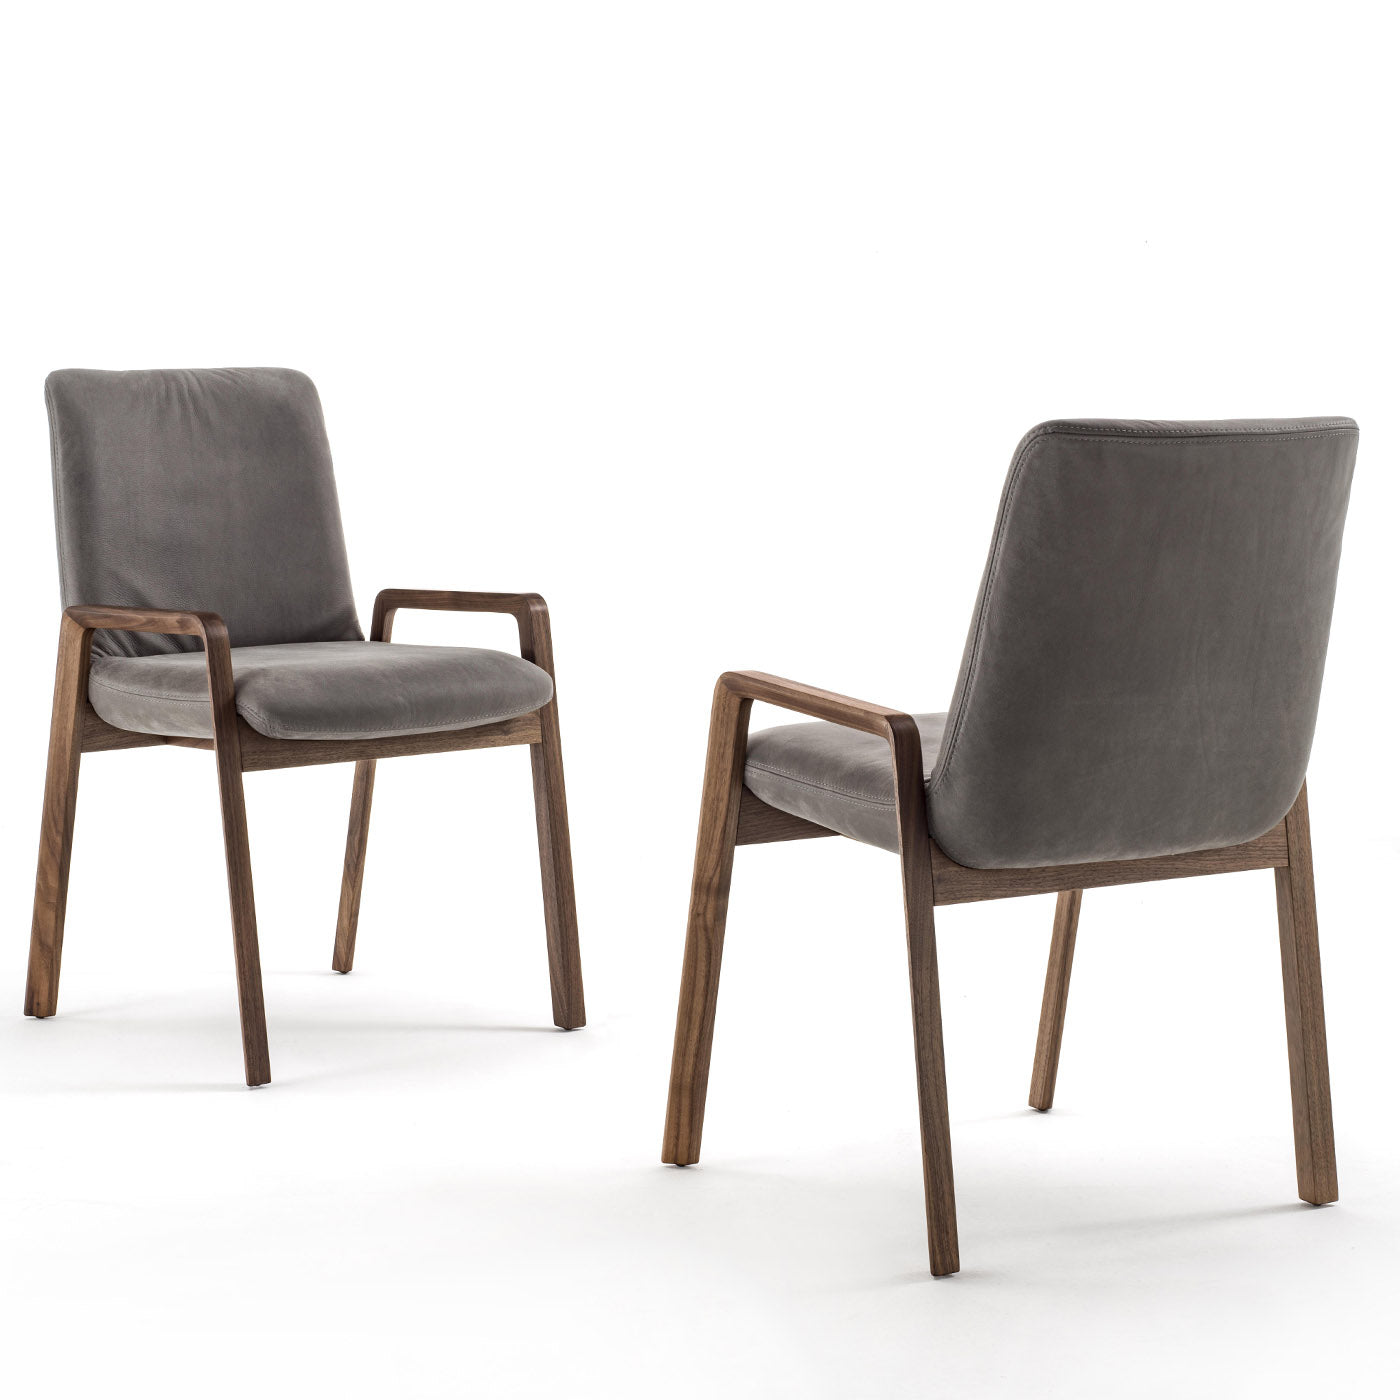 Noblé Gray Chair With Arms by Giuliano & Gabriele Cappelletti - Alternative view 5